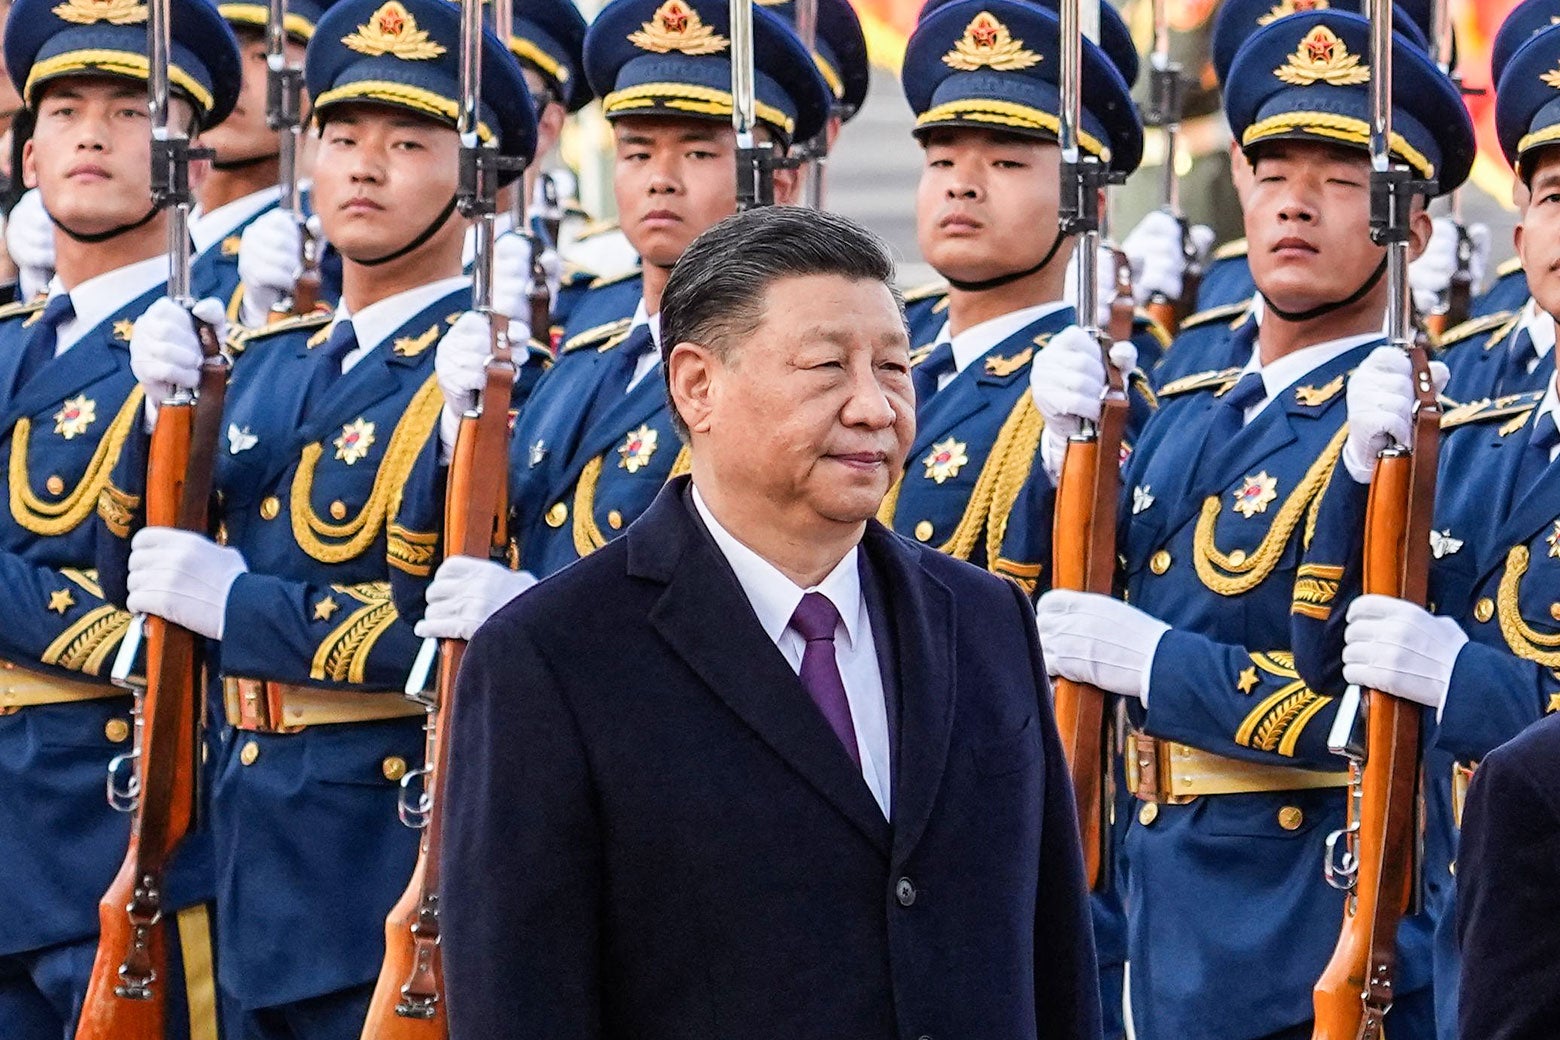 Chinese President Xi Jinping stands in front of a row of soldiers.